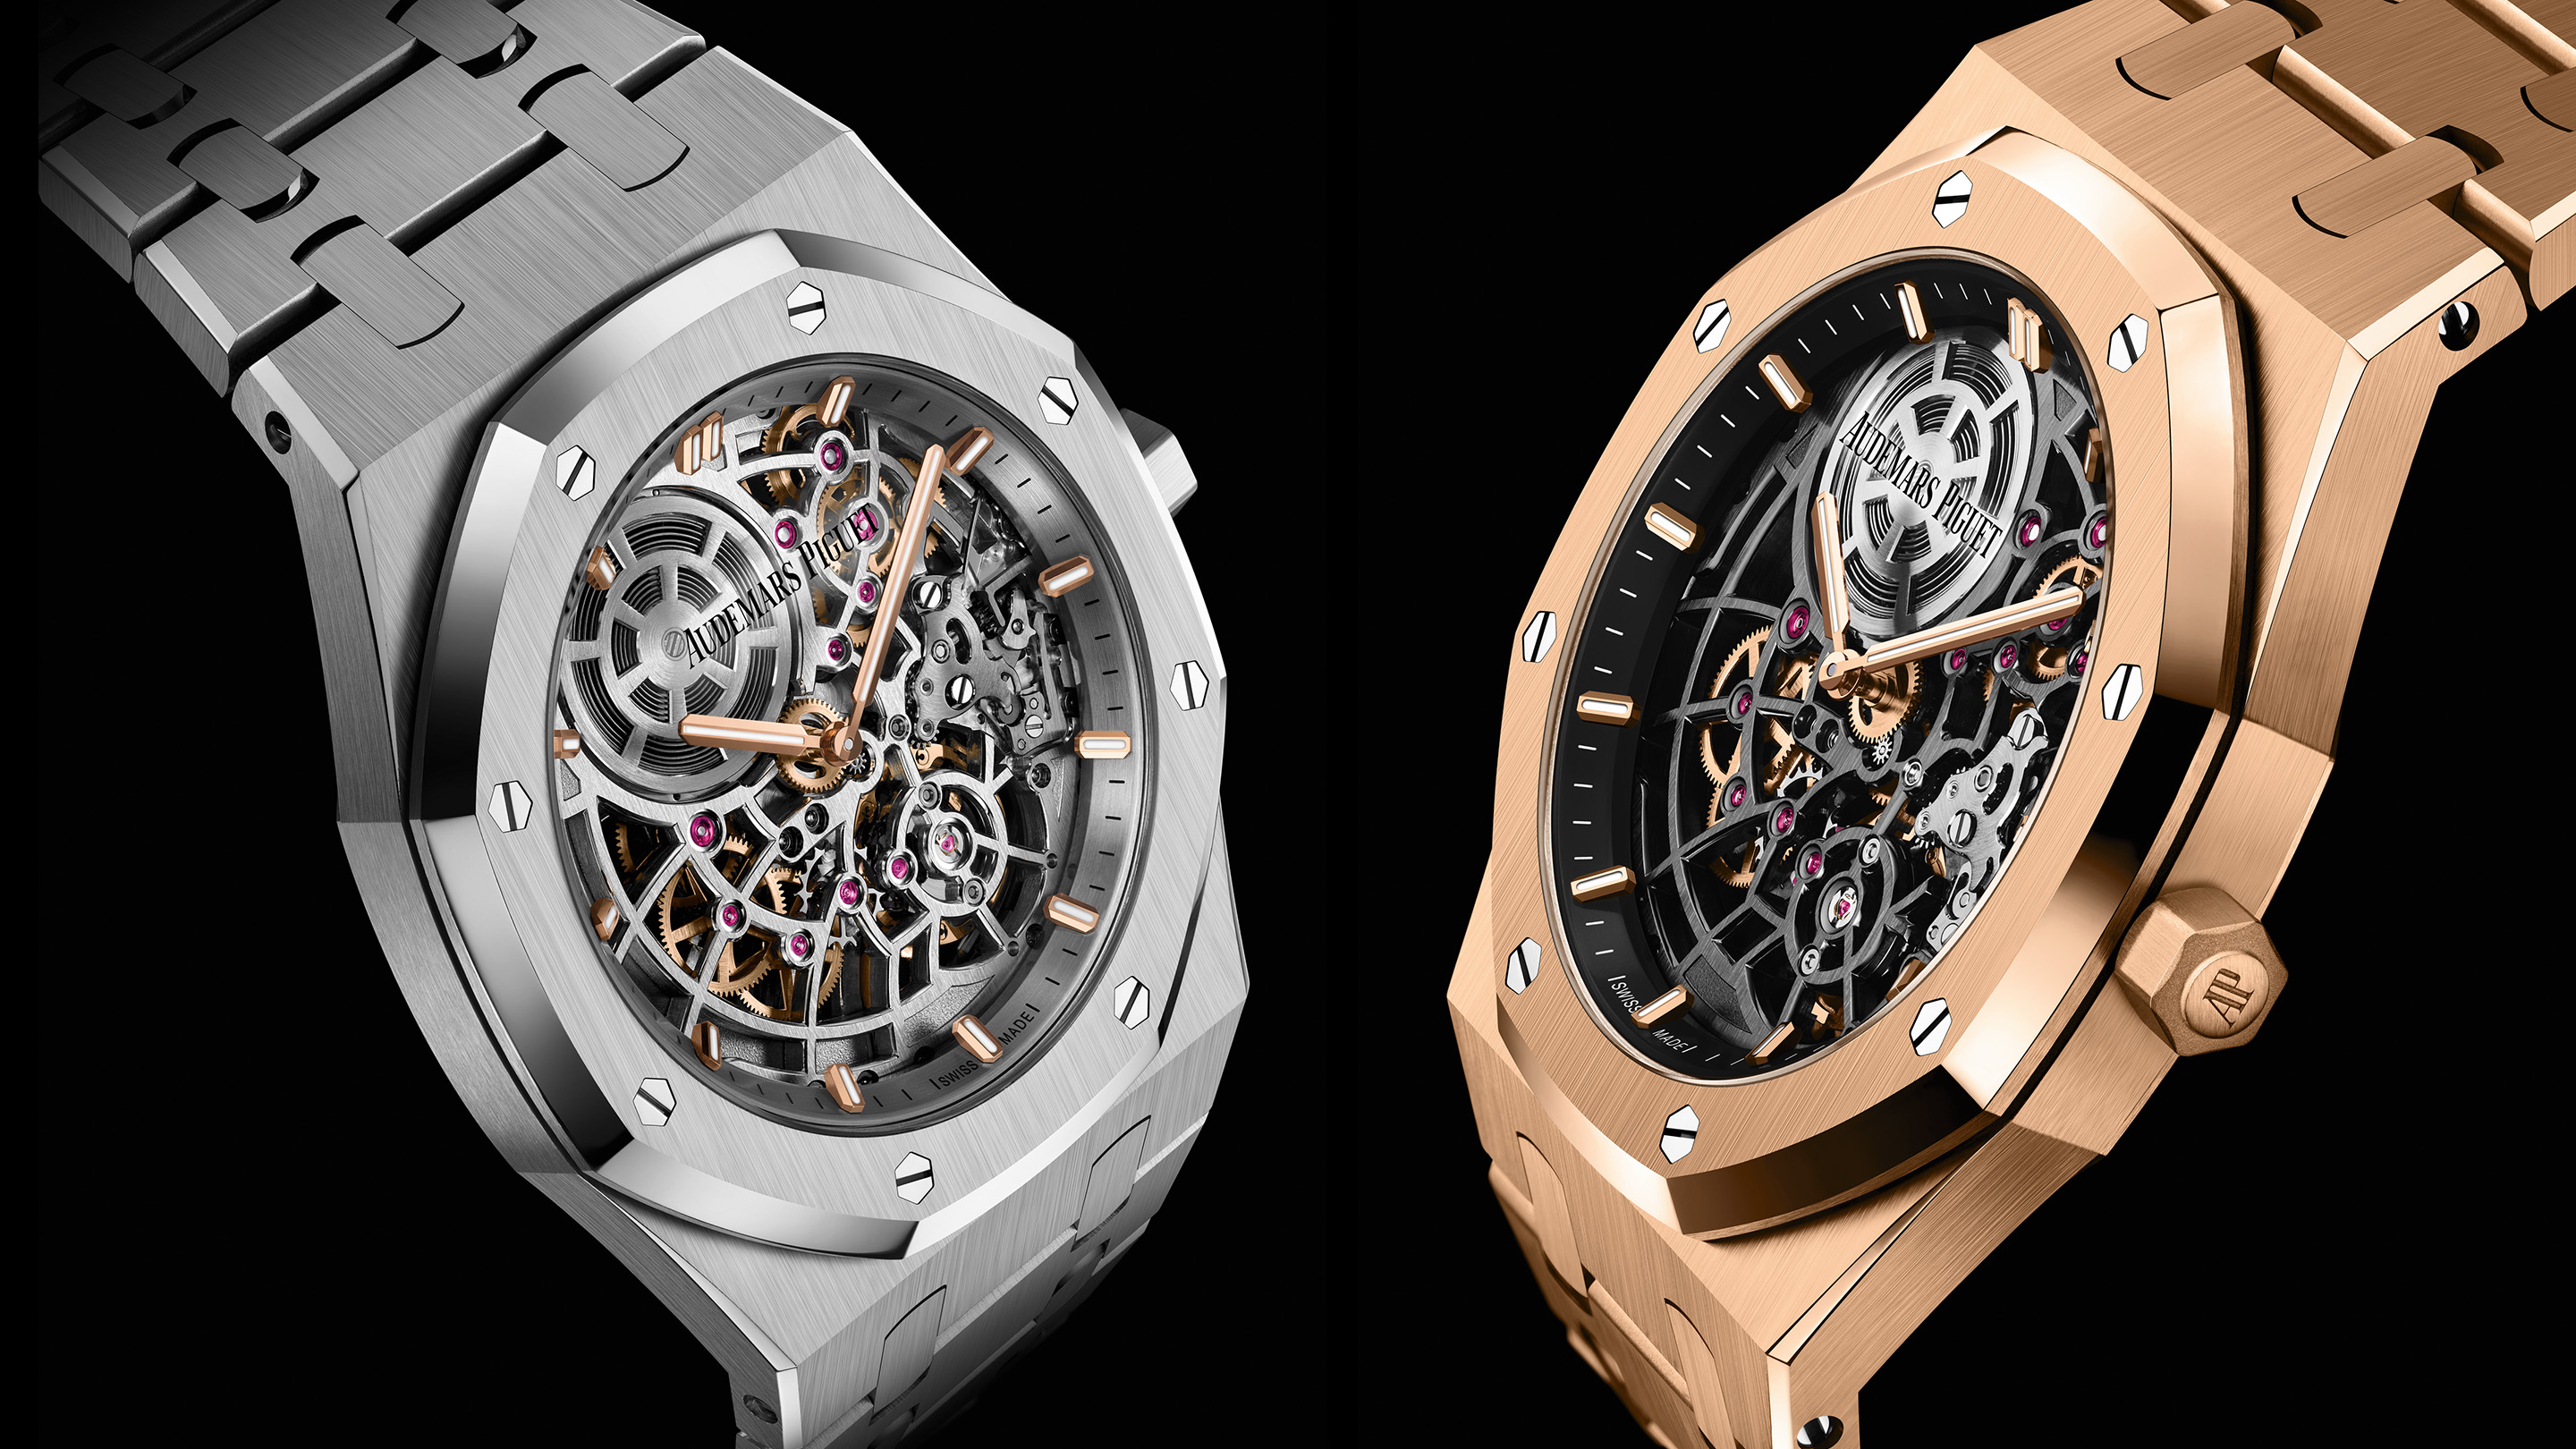 Skeleton Dial Watches 101 | The Watch Club by SwissWatchExpo